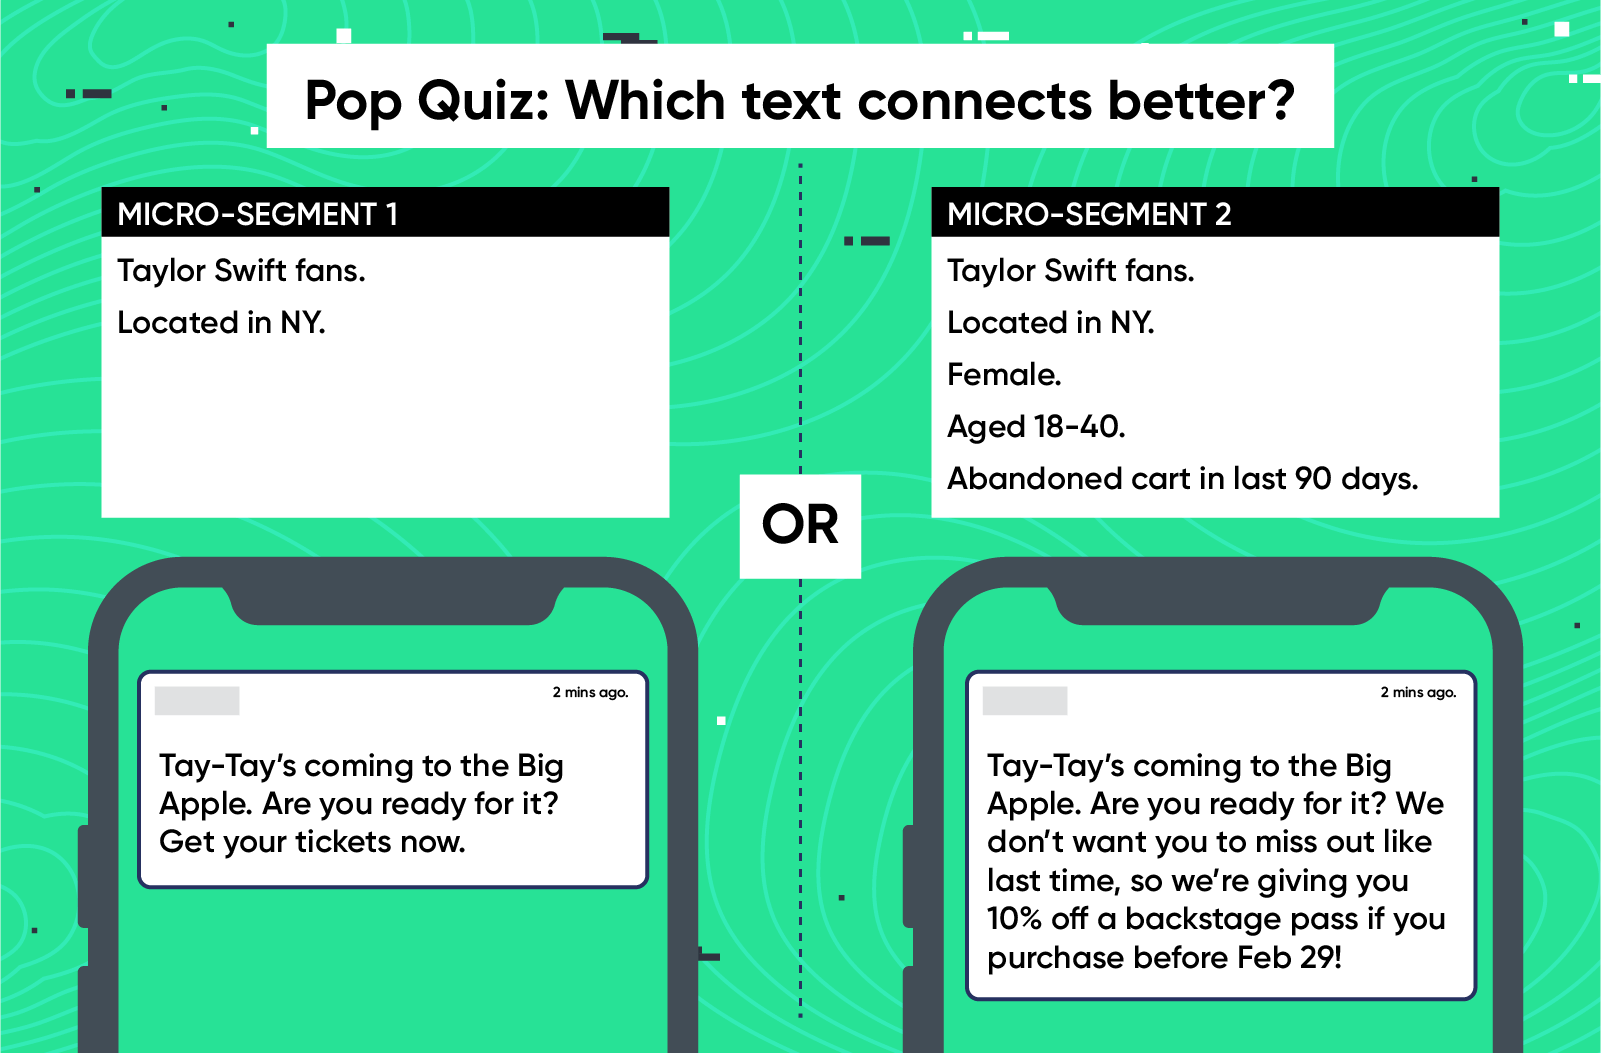 conversational marketing - which text connects better?